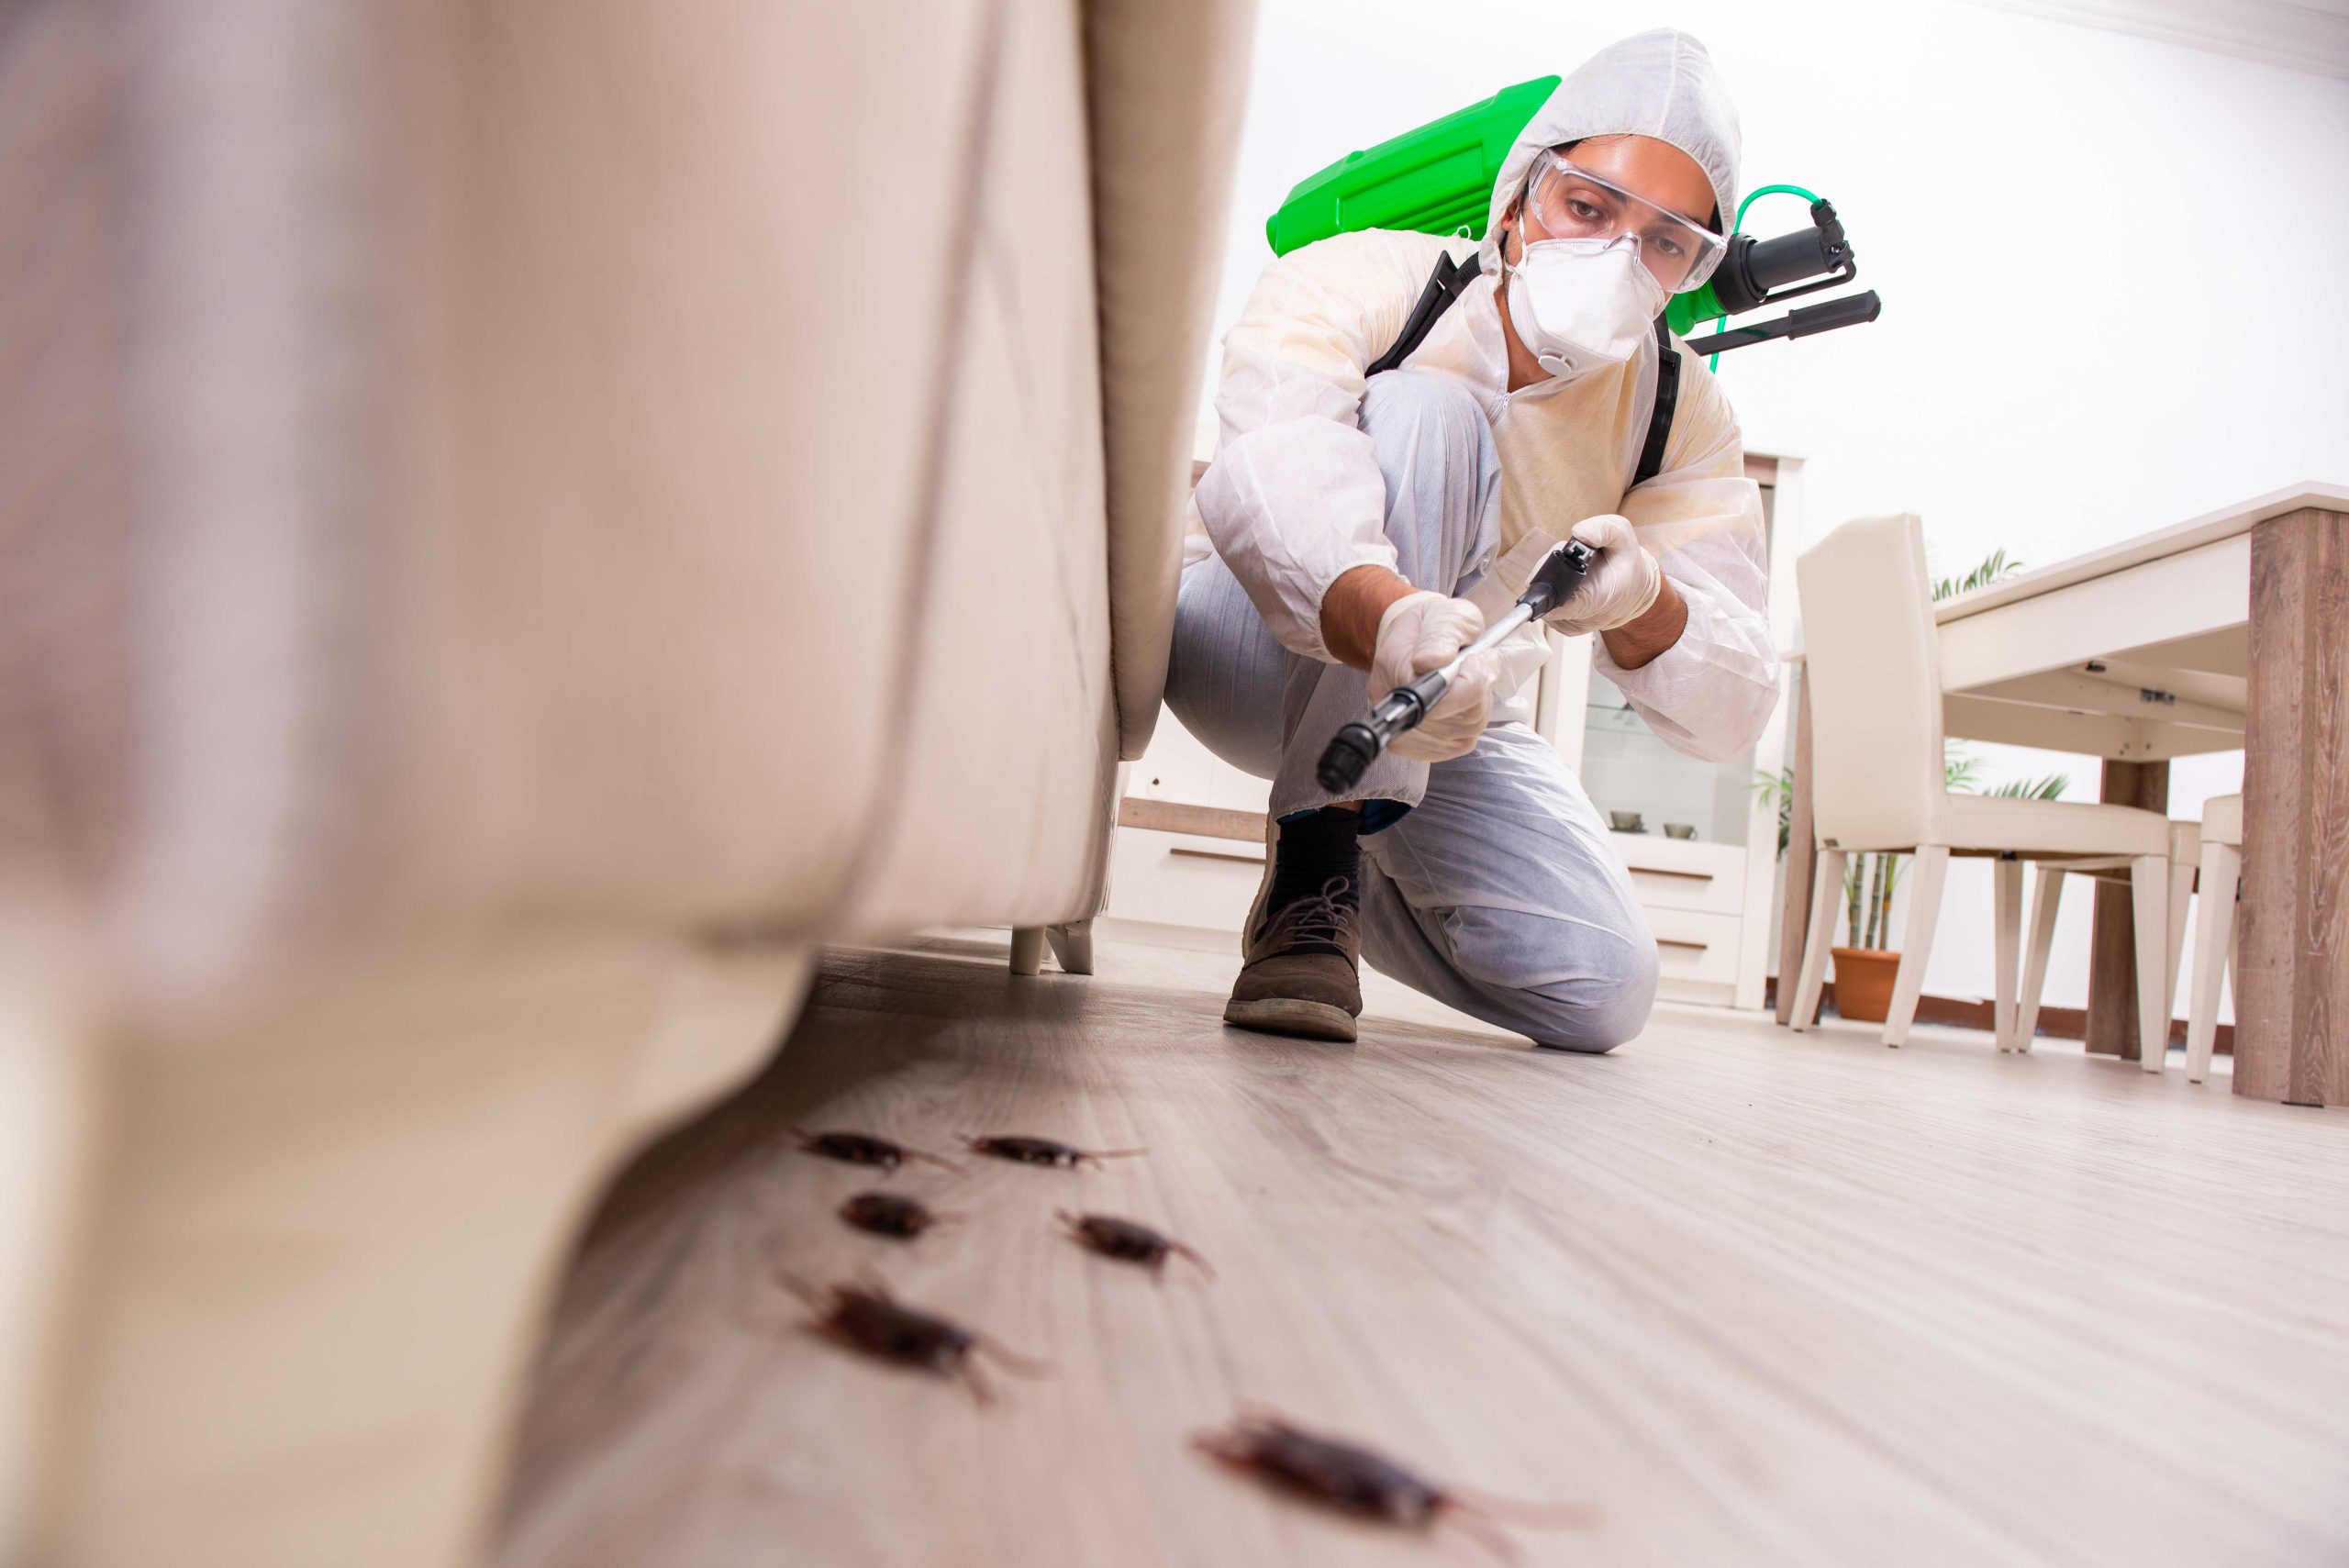 Pest-Control experts in San Jose specializing in prevention and eradication of various pests. Don't let pests damage your property and endanger your health.